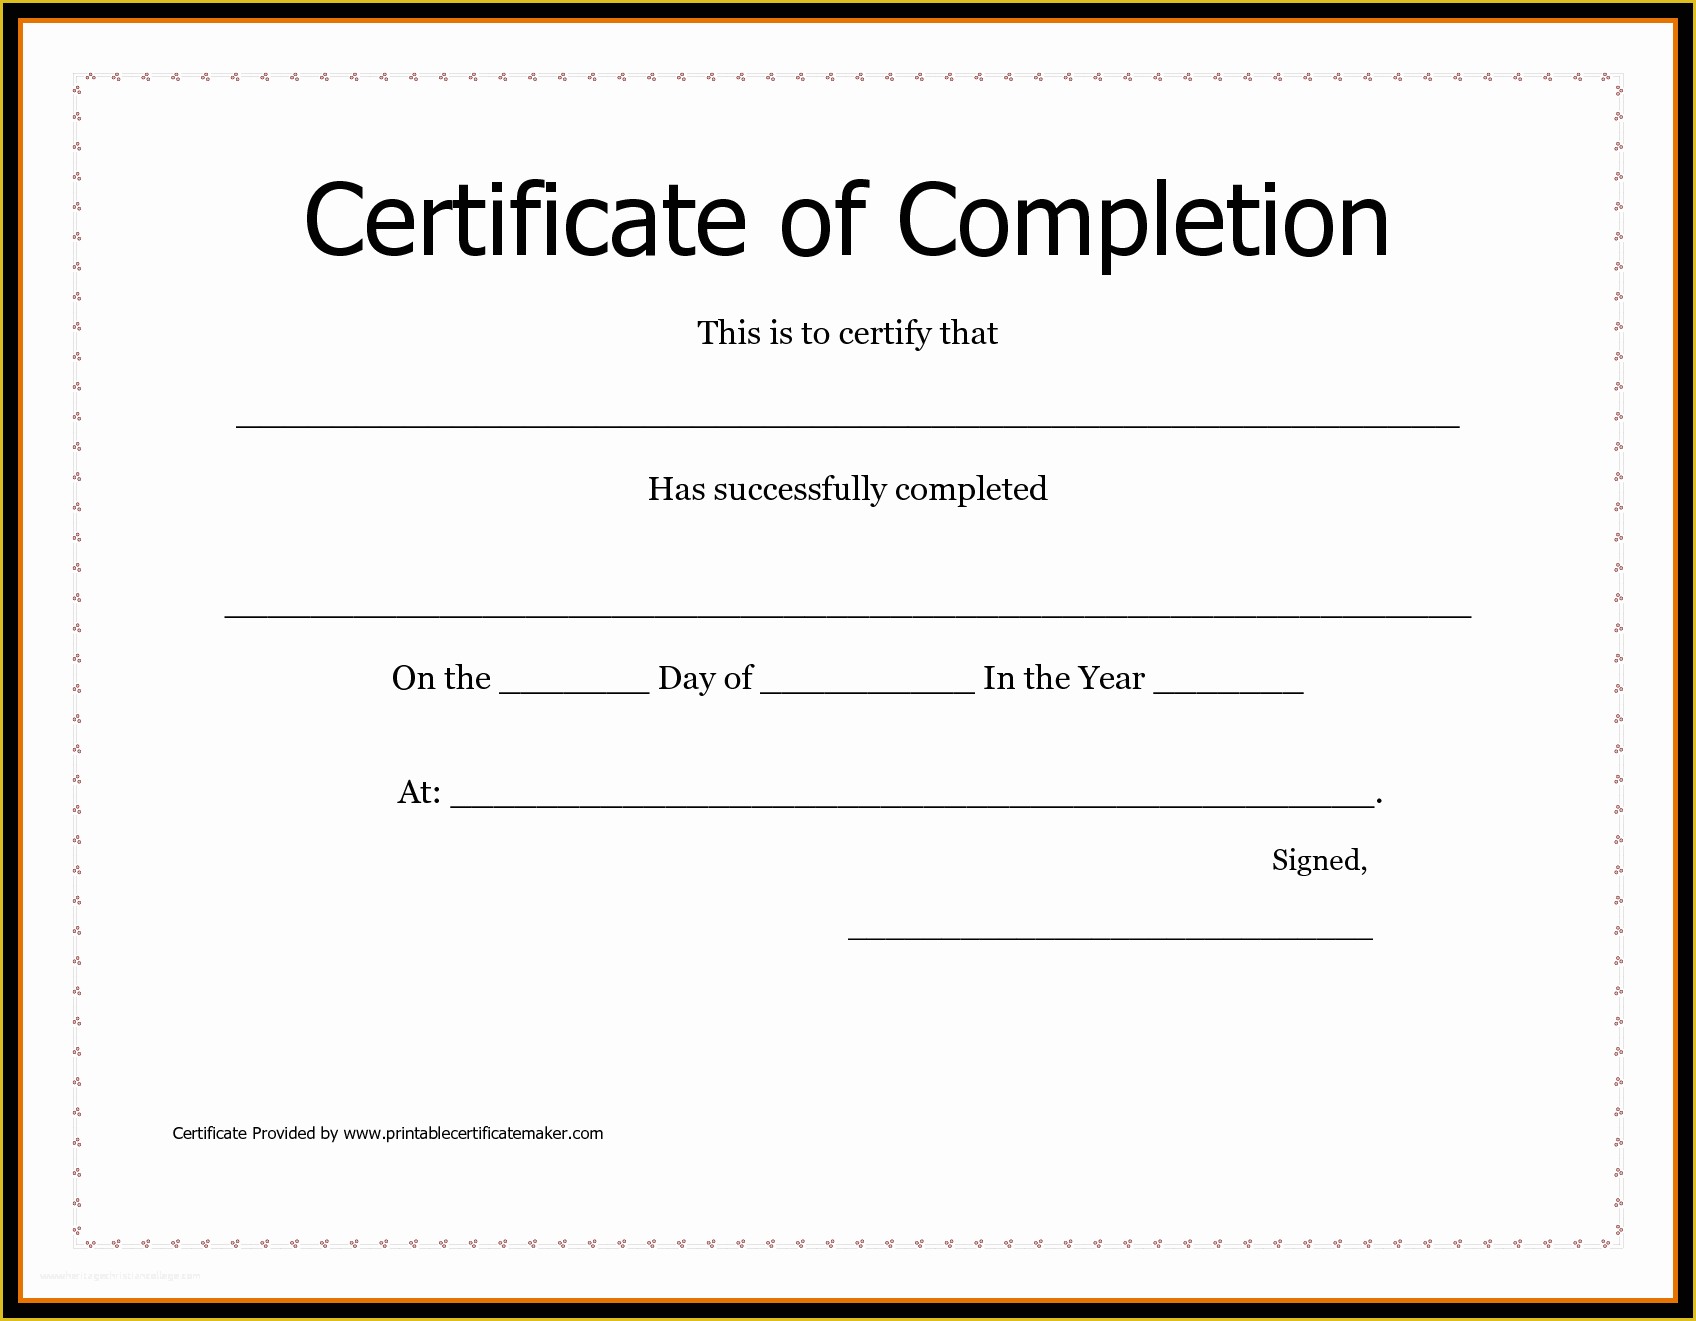 Certificate Of Completion Template Free Download Of Achievement Certificate Templates Free Mughals